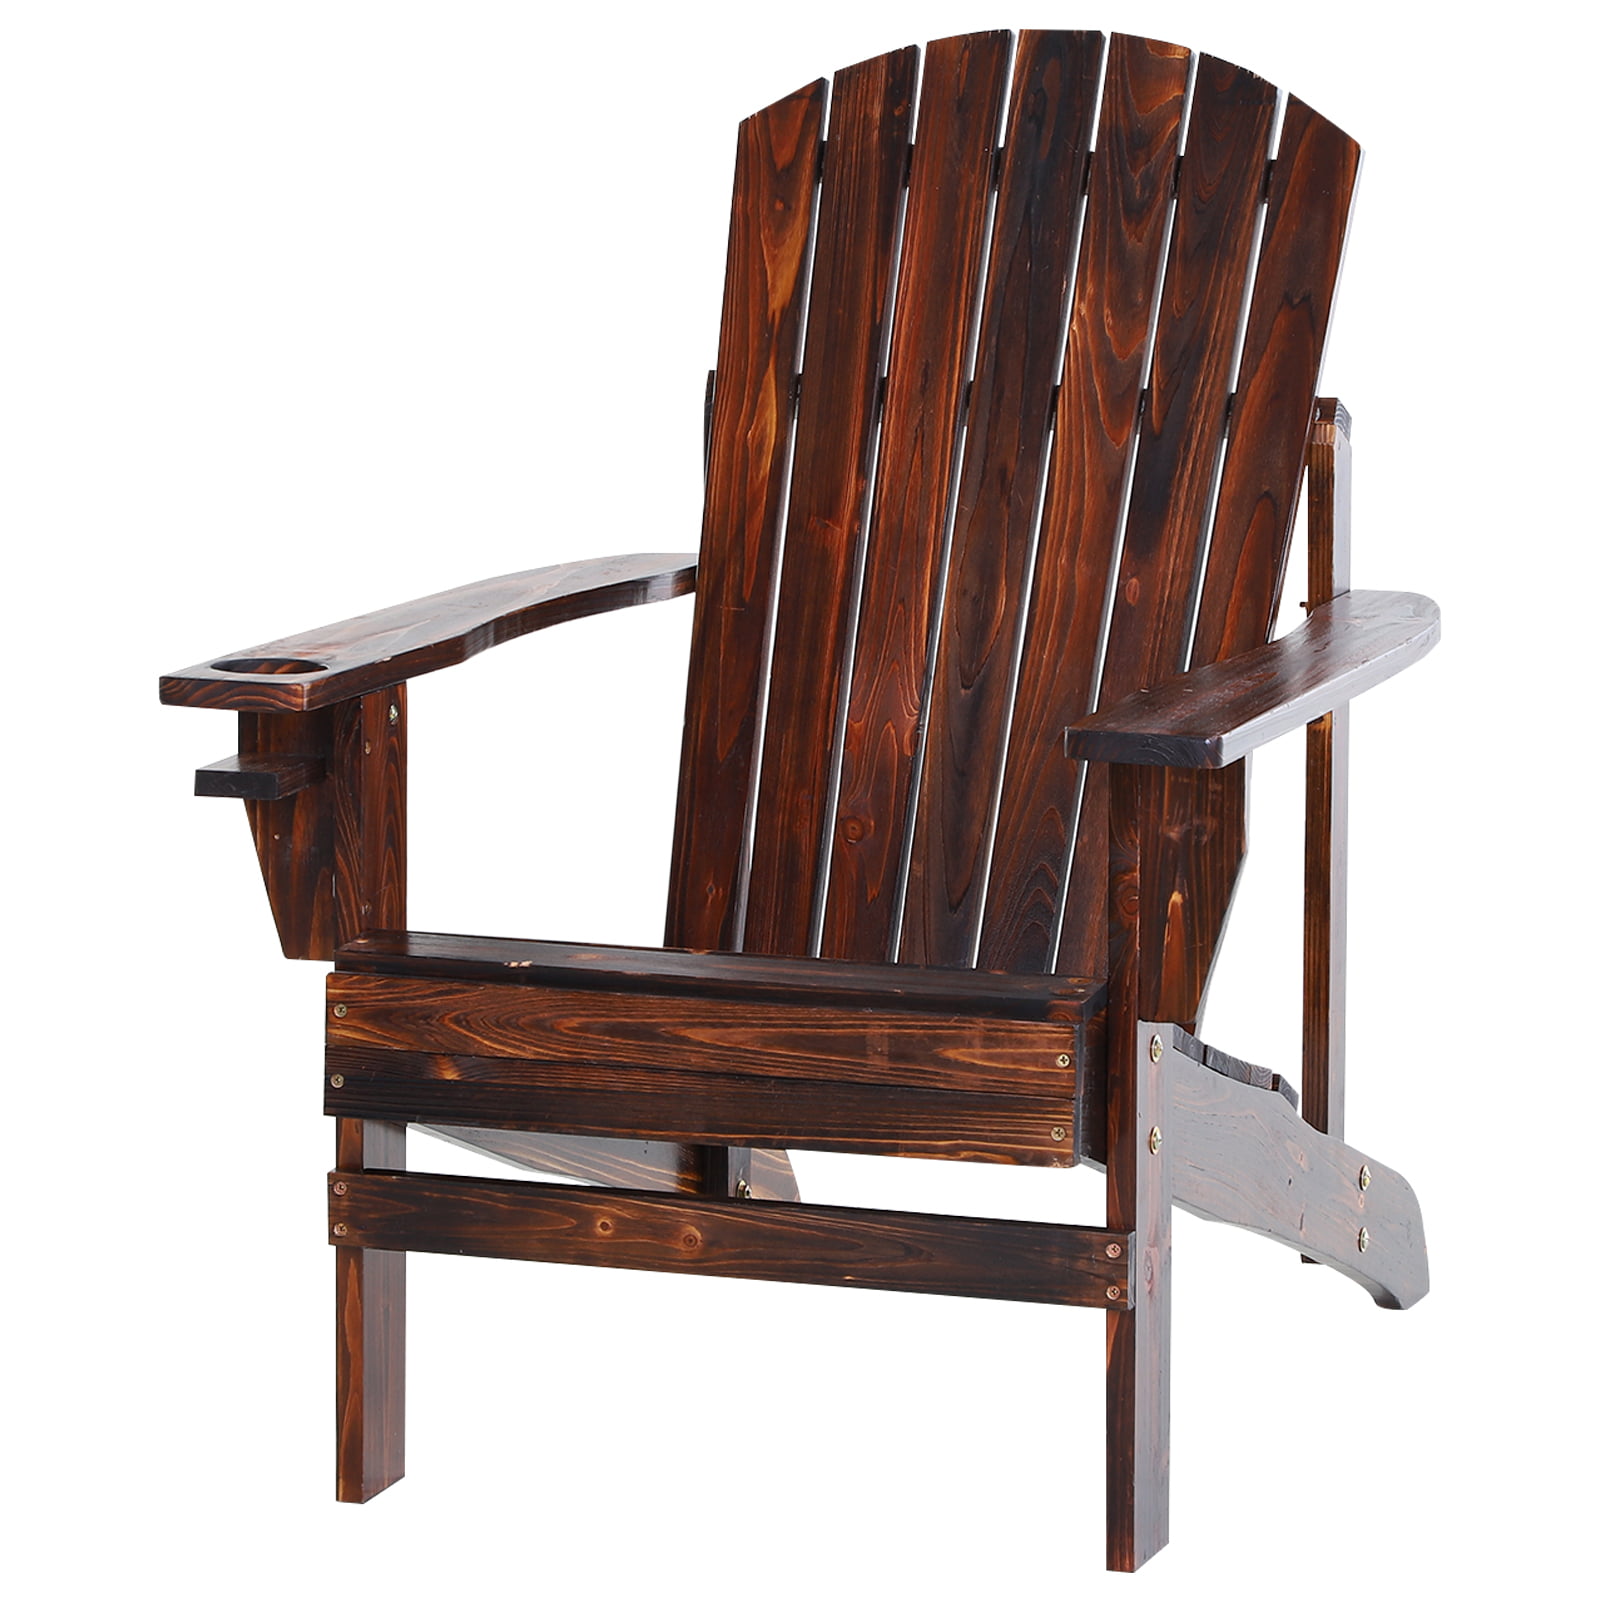 Outsunny Outdoor Classic Wooden Adirondack Deck Lounge